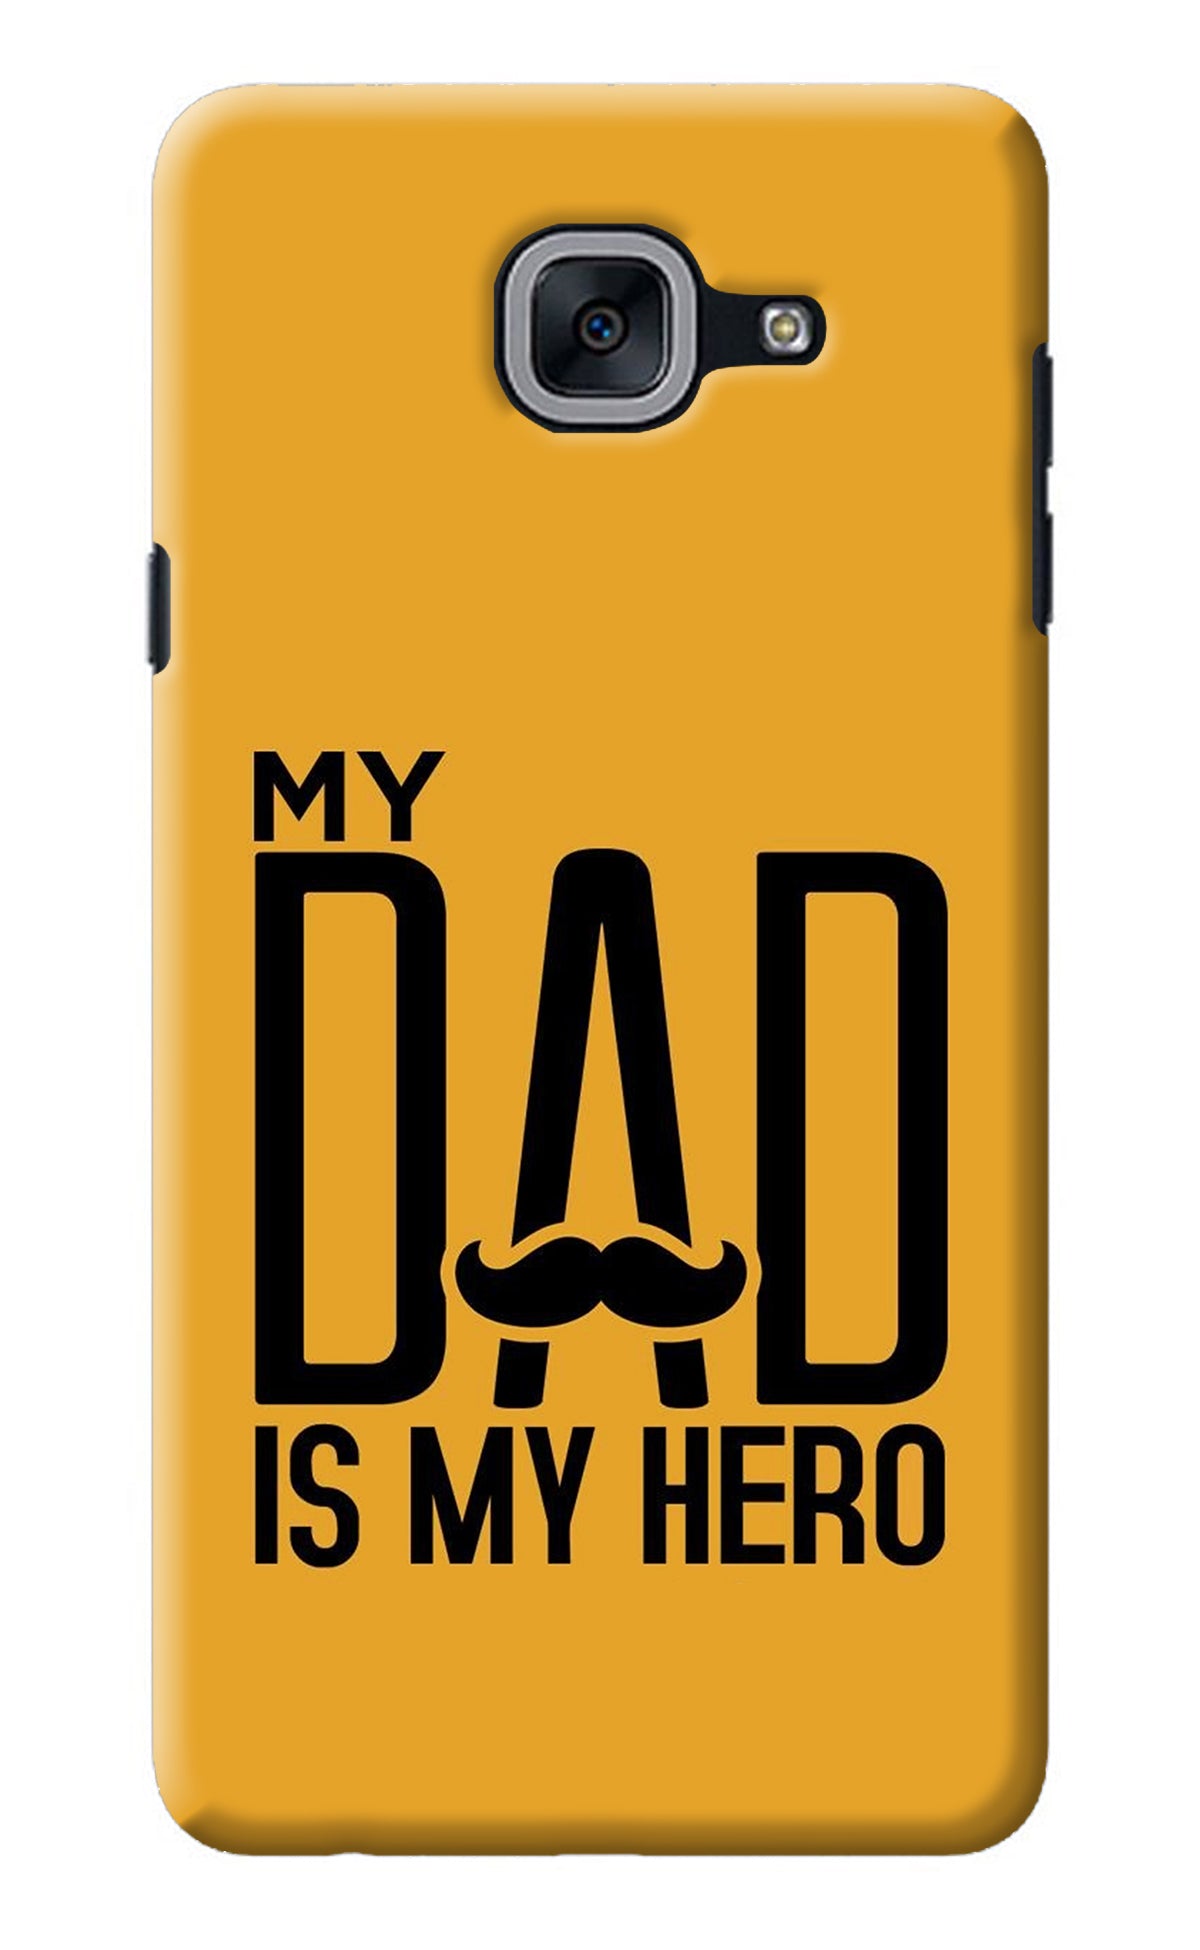 My Dad Is My Hero Samsung J7 Max Back Cover